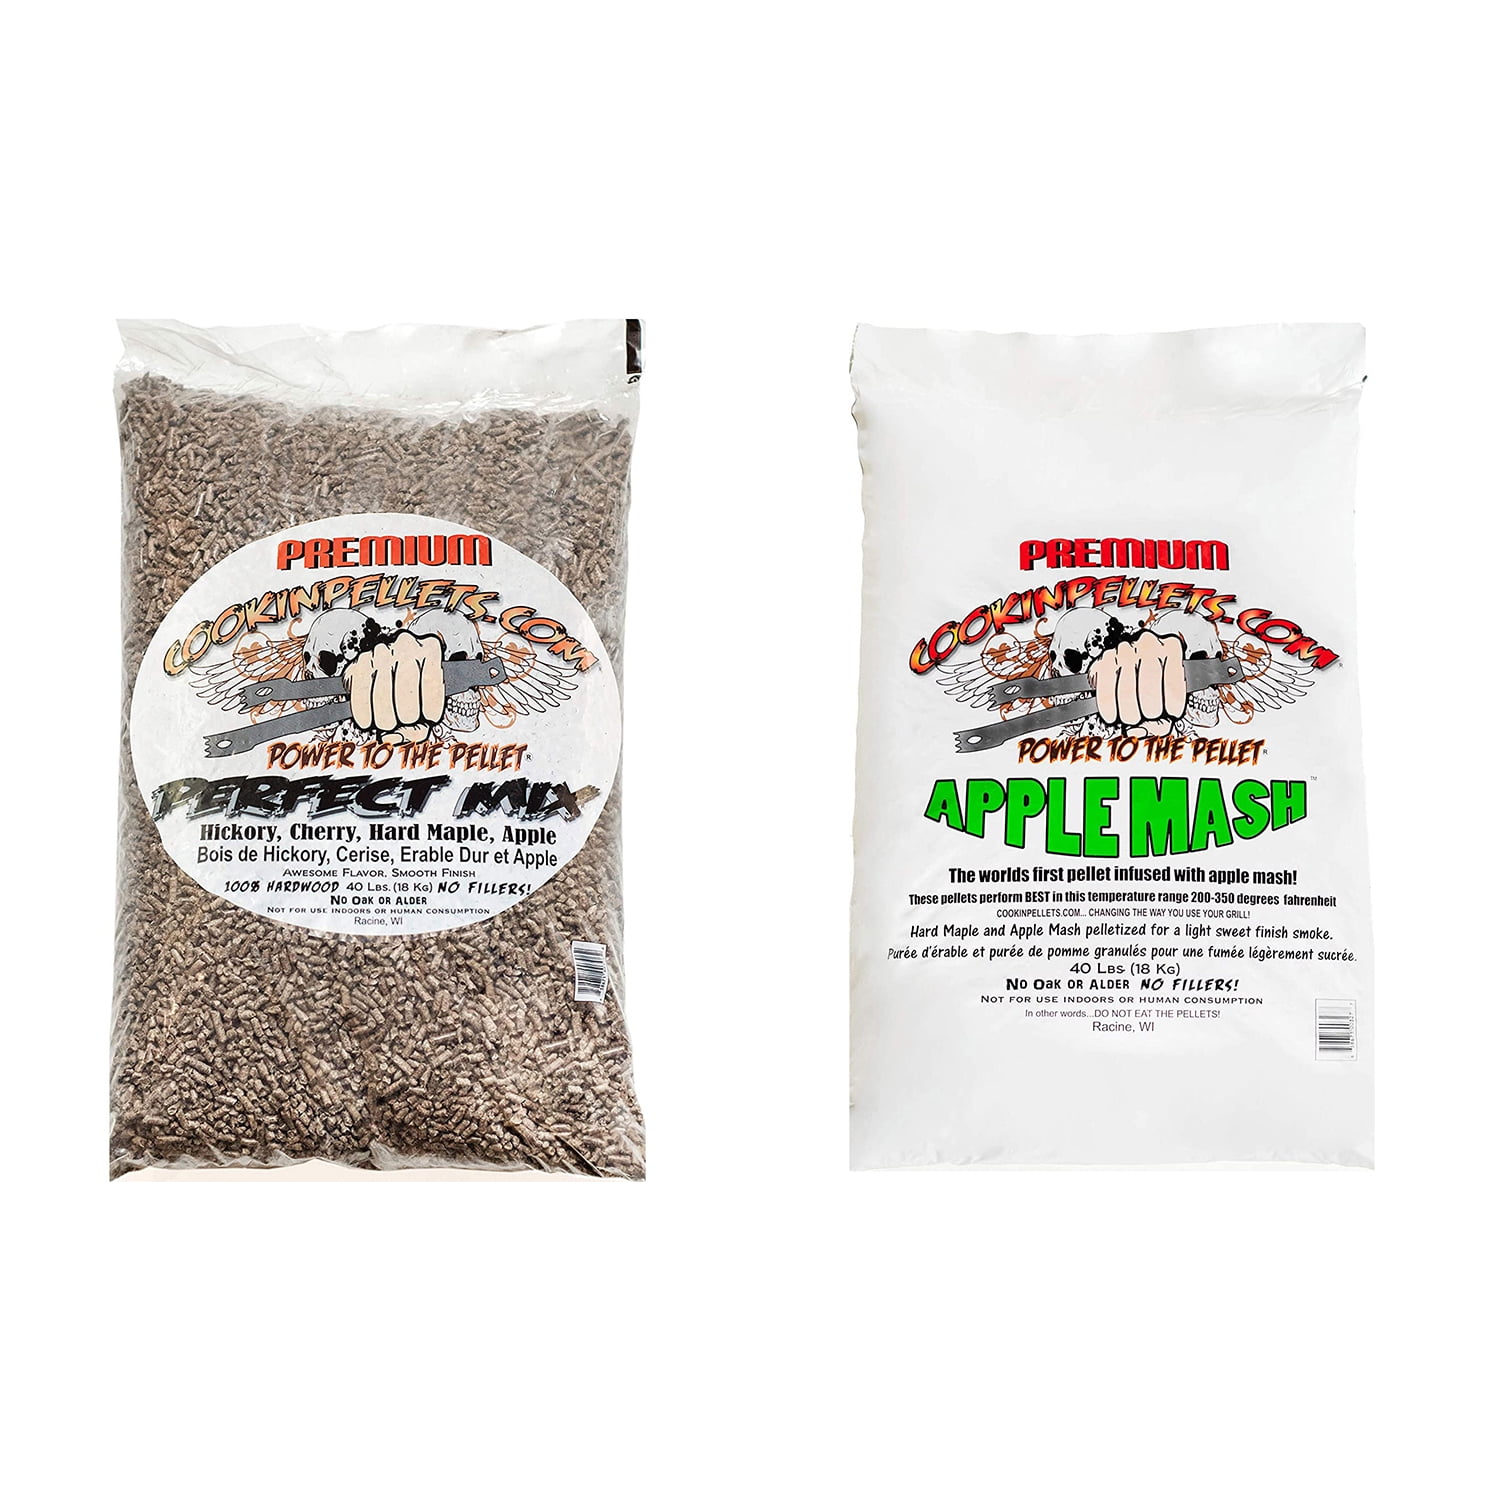 CookinPellets Perfect Mix 5kg Smoking Pellets Smoker Tubes Gas Charcoal BBQ's